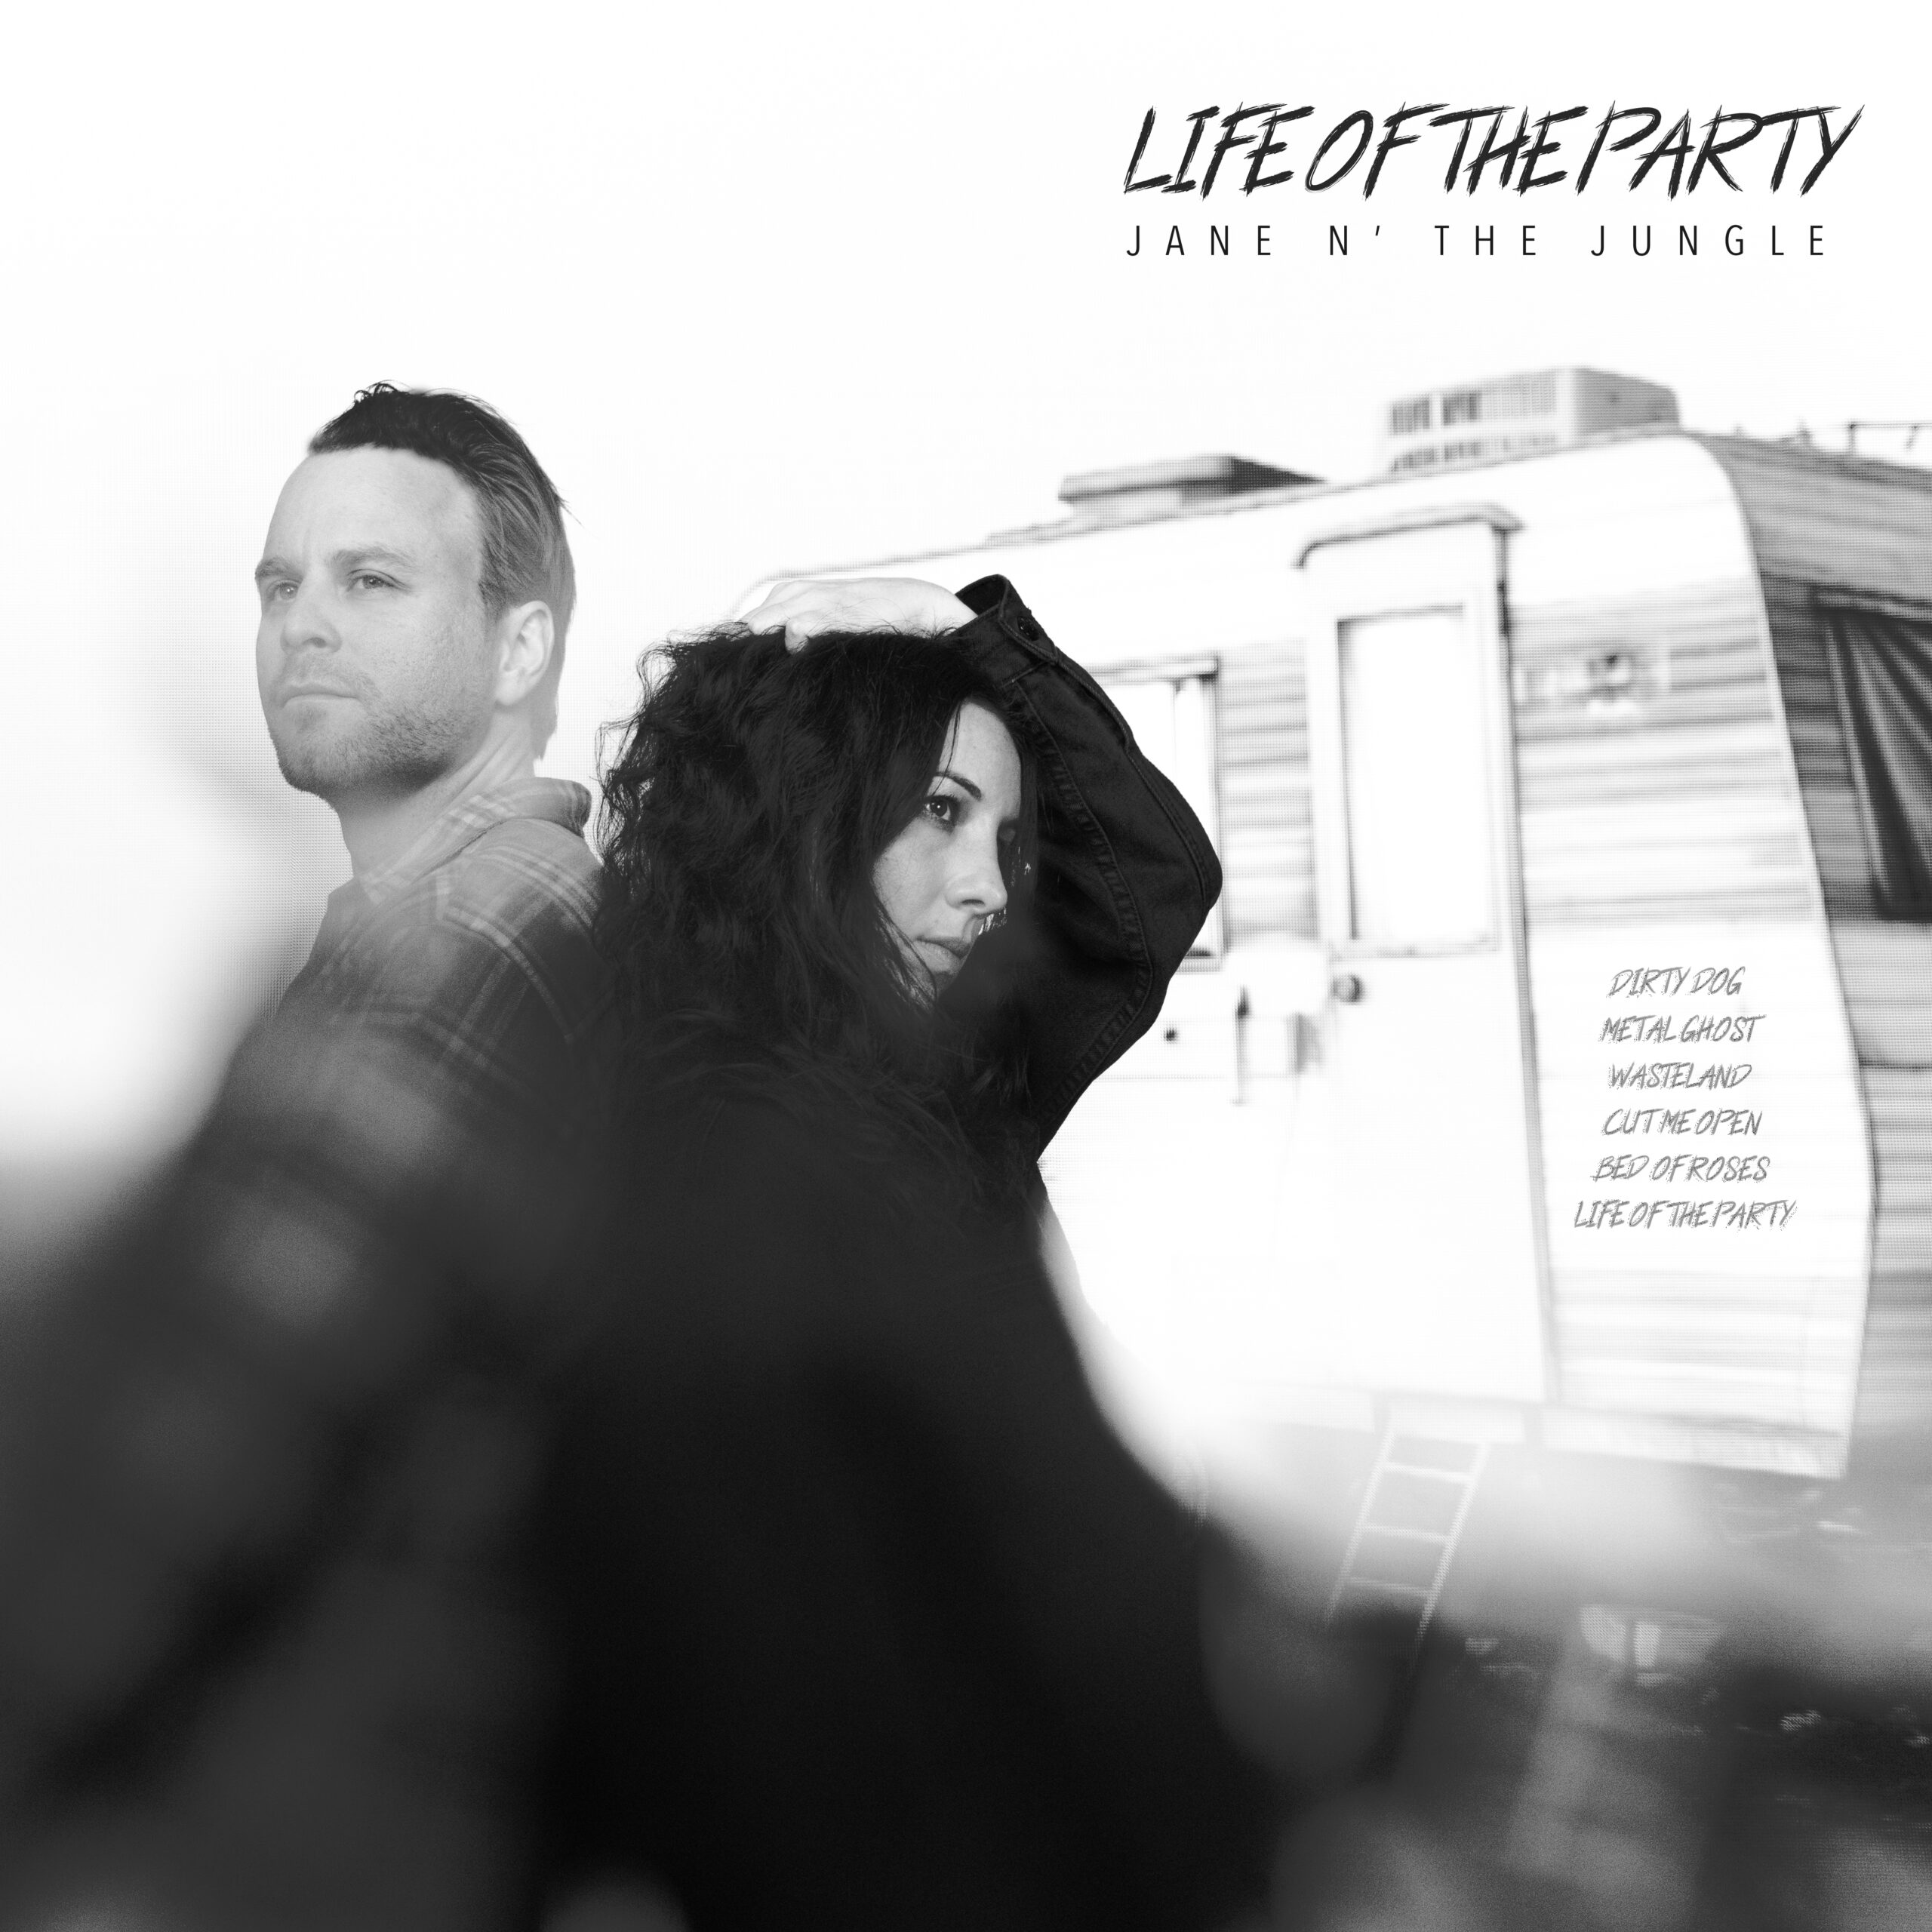 Life of the Party by Jane N' The Jungle album art